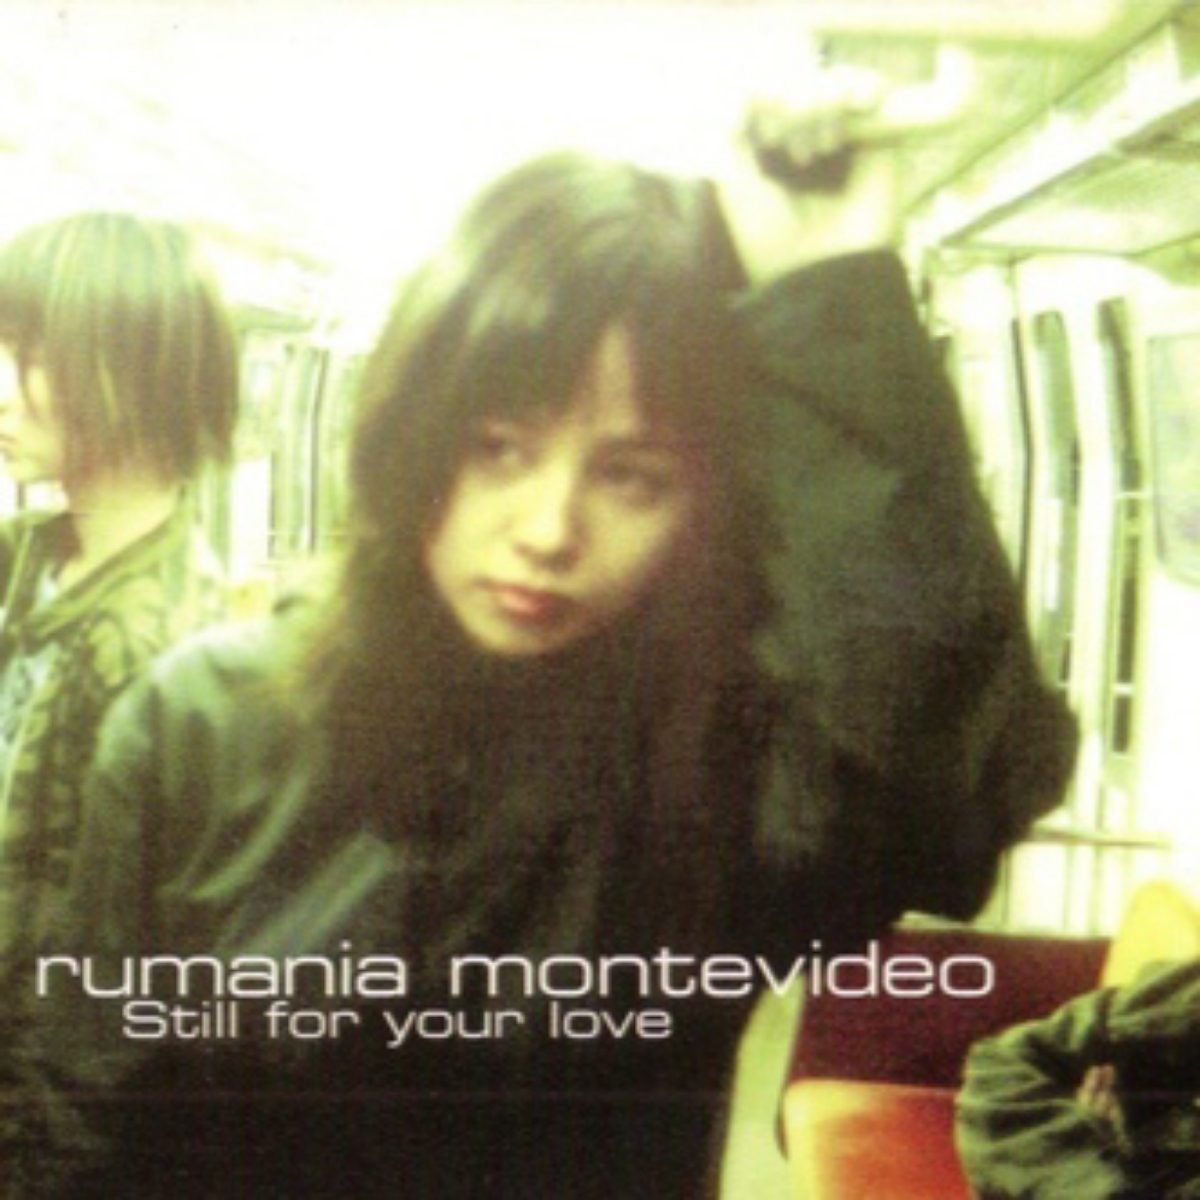 Rumania Montevideo - Still for Your Love